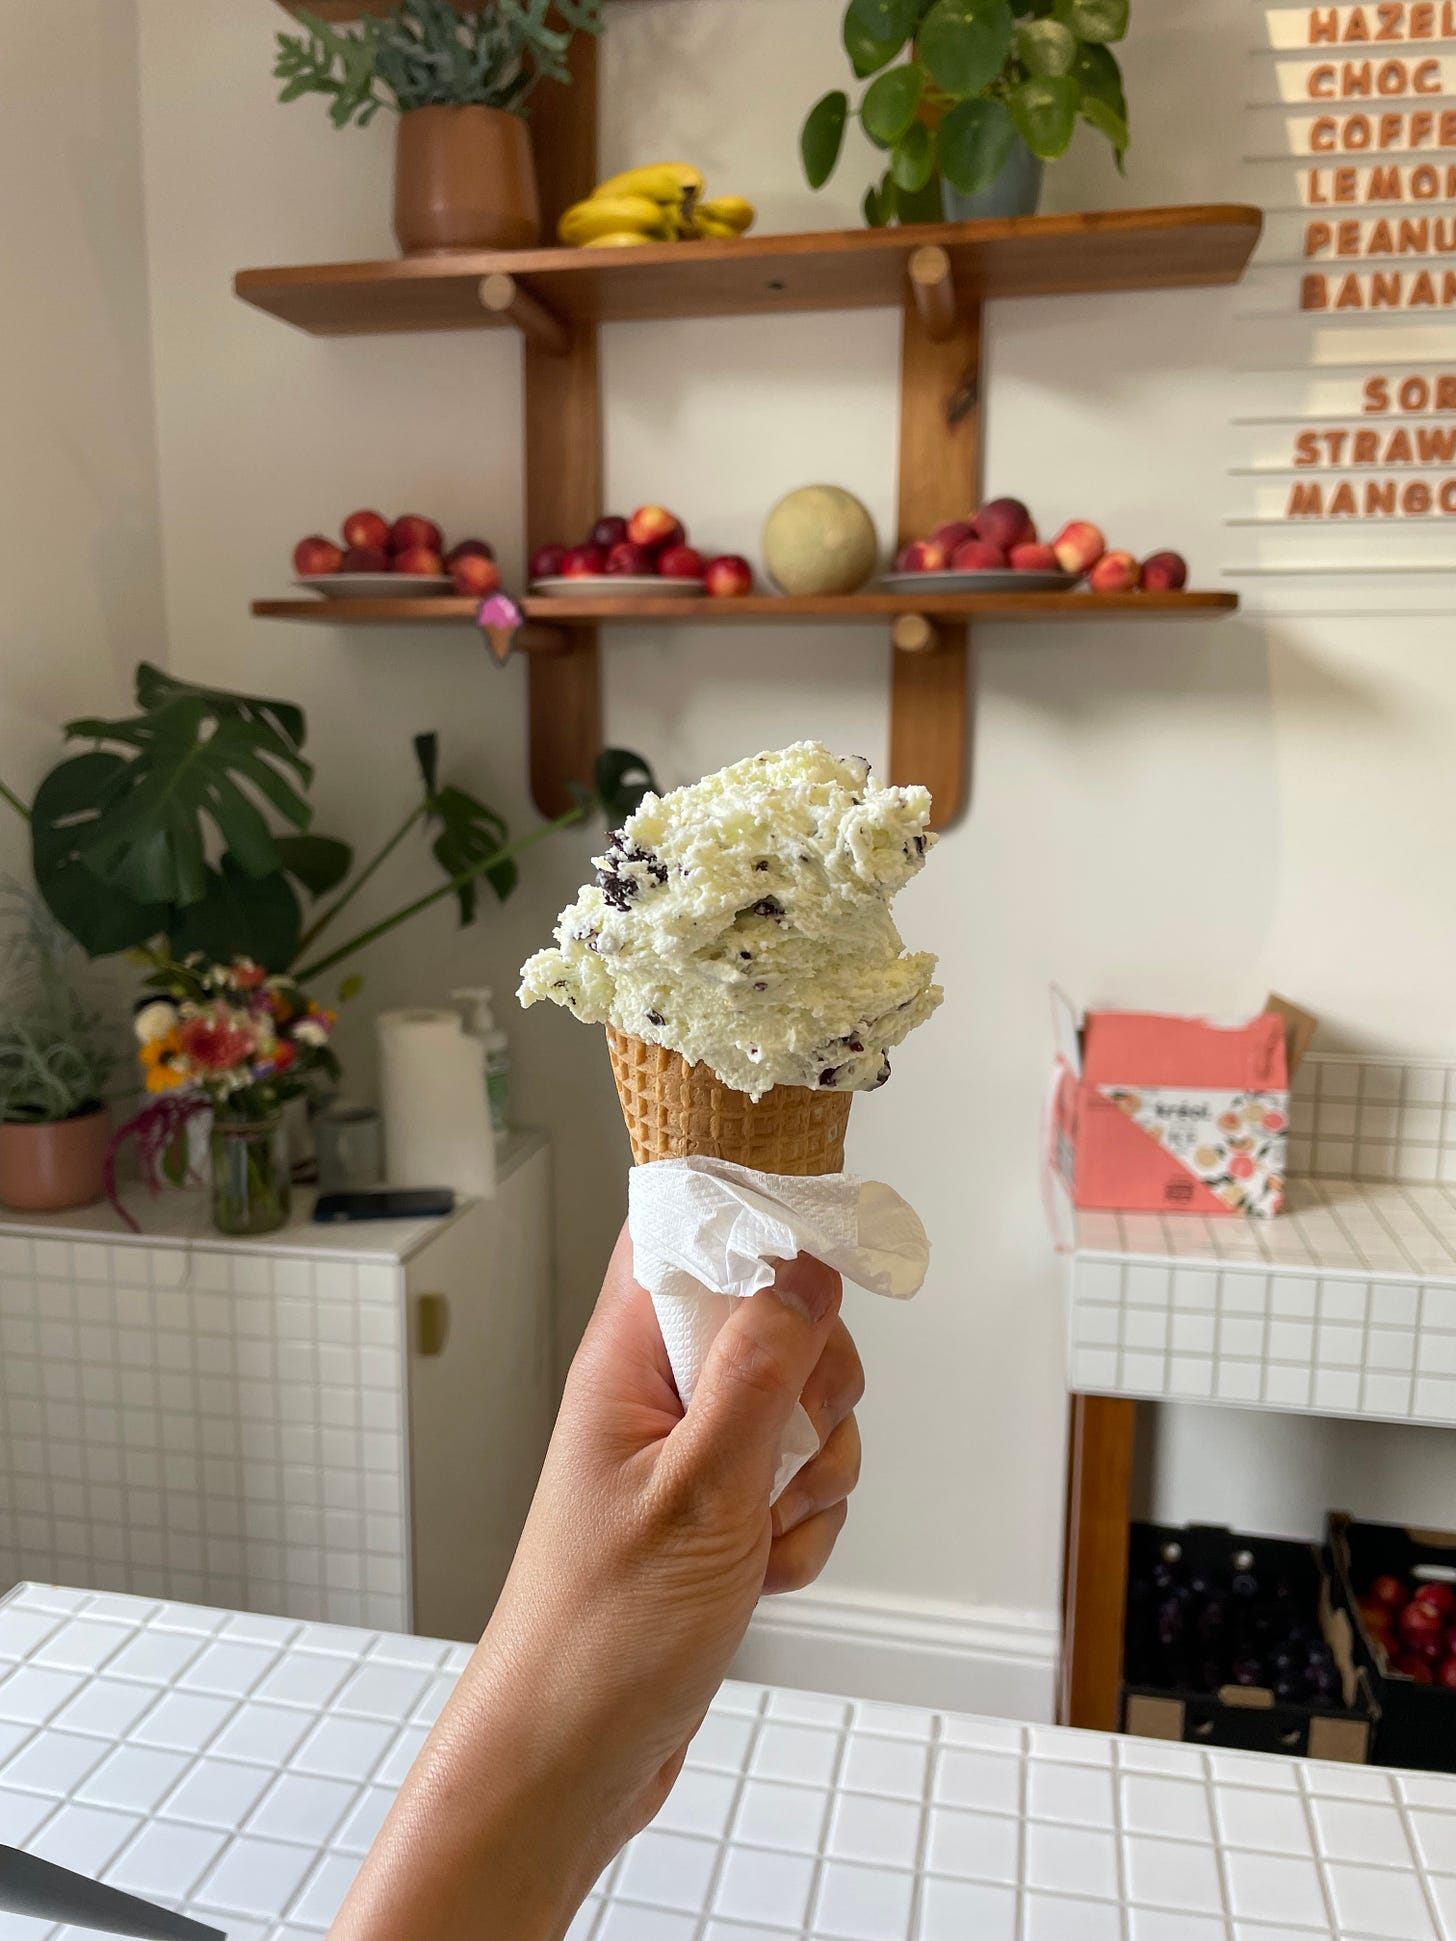 An ice cream cone with mint choc chip gelato held up in front of a shelf display with nectarines, rockmelon, peaches and banana. Inside a gelato shop with the menu displayed on the wall.